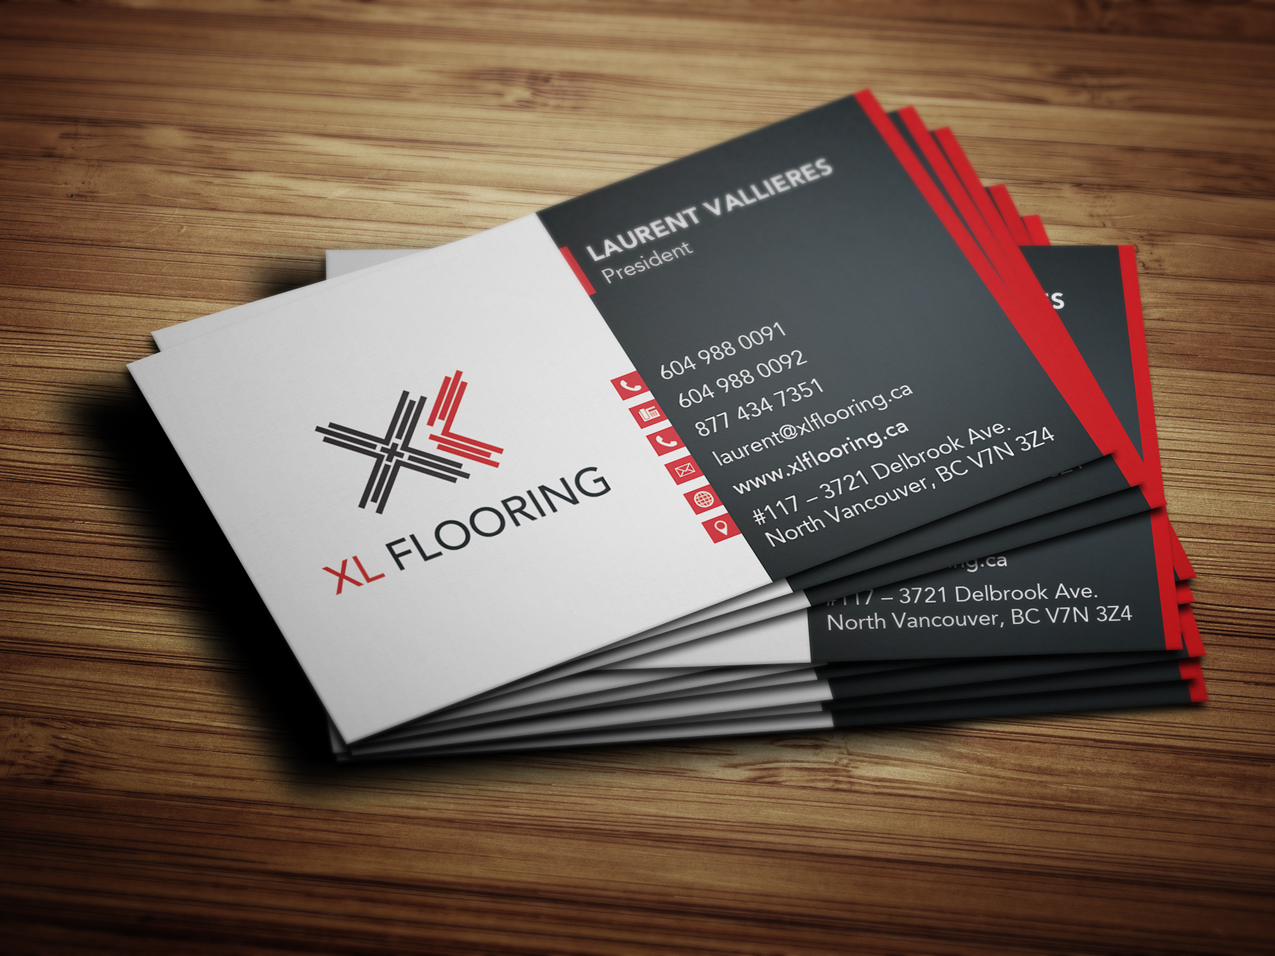 Flooring Company Business Cards